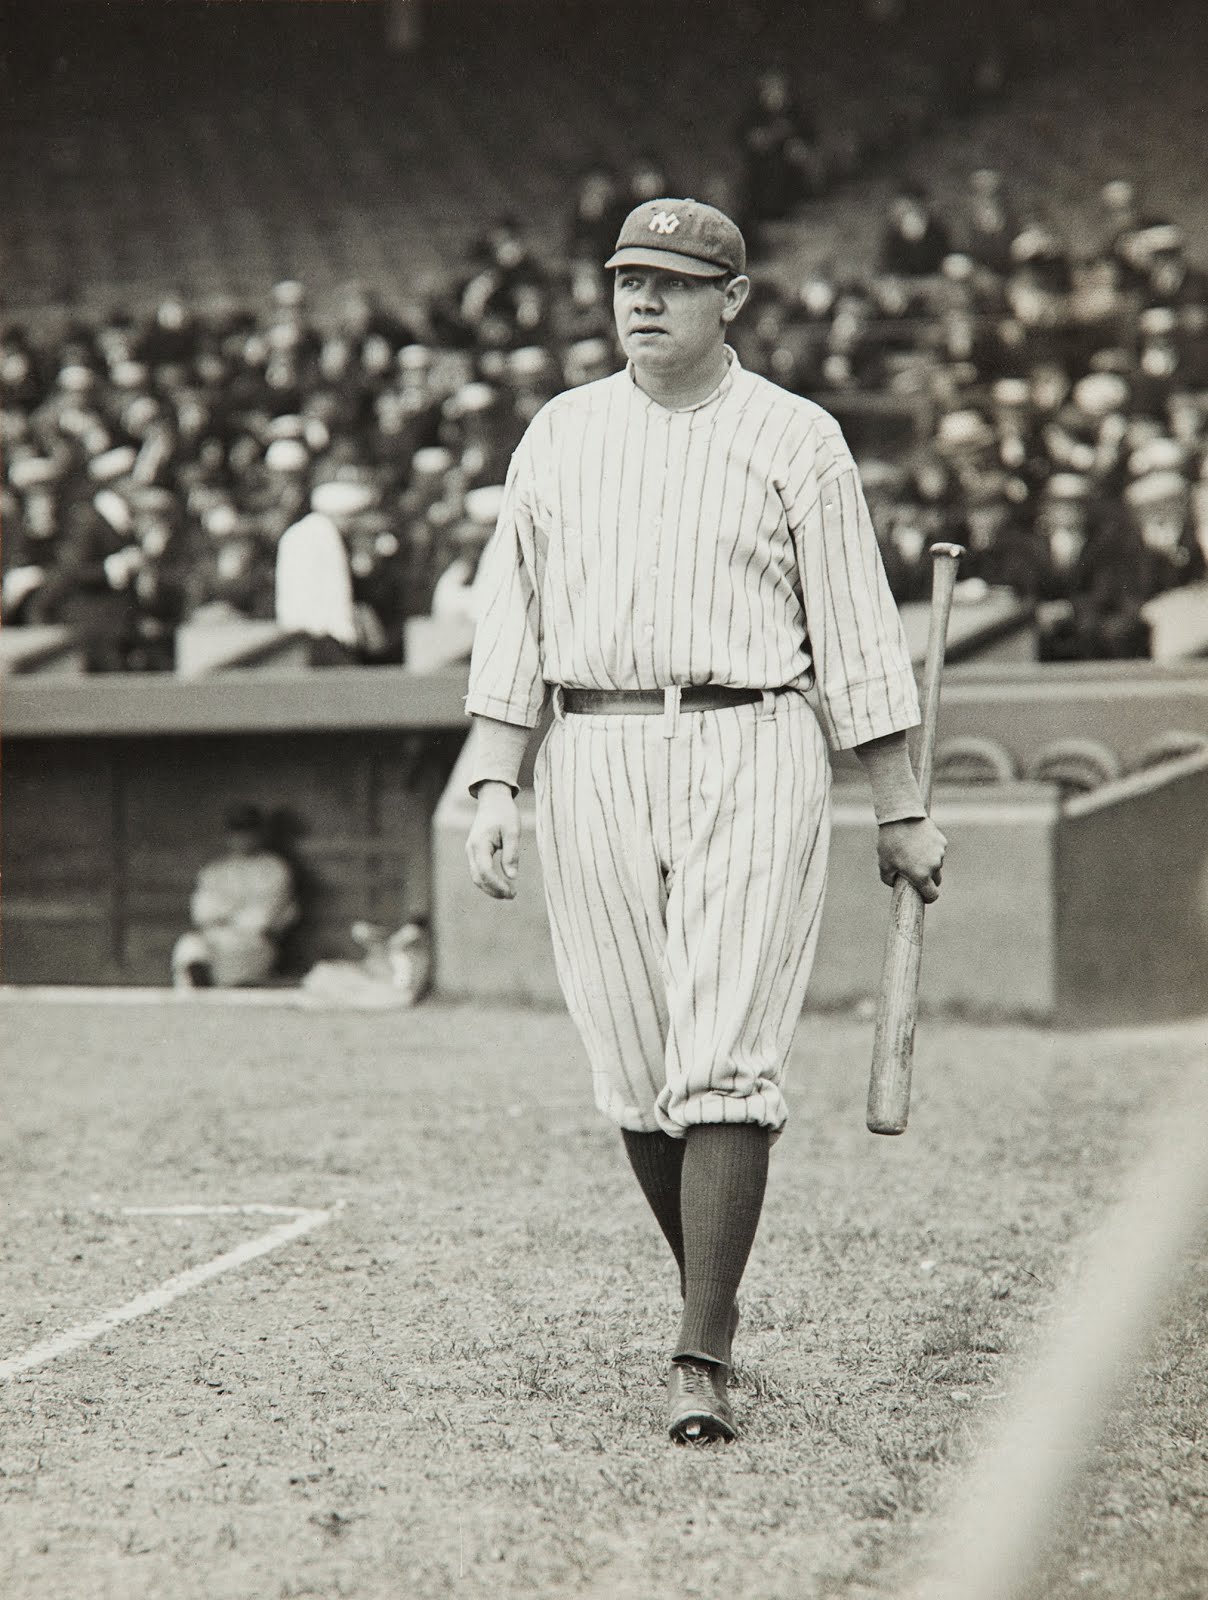 Ruth in his first year with the New York Yankees, 1920